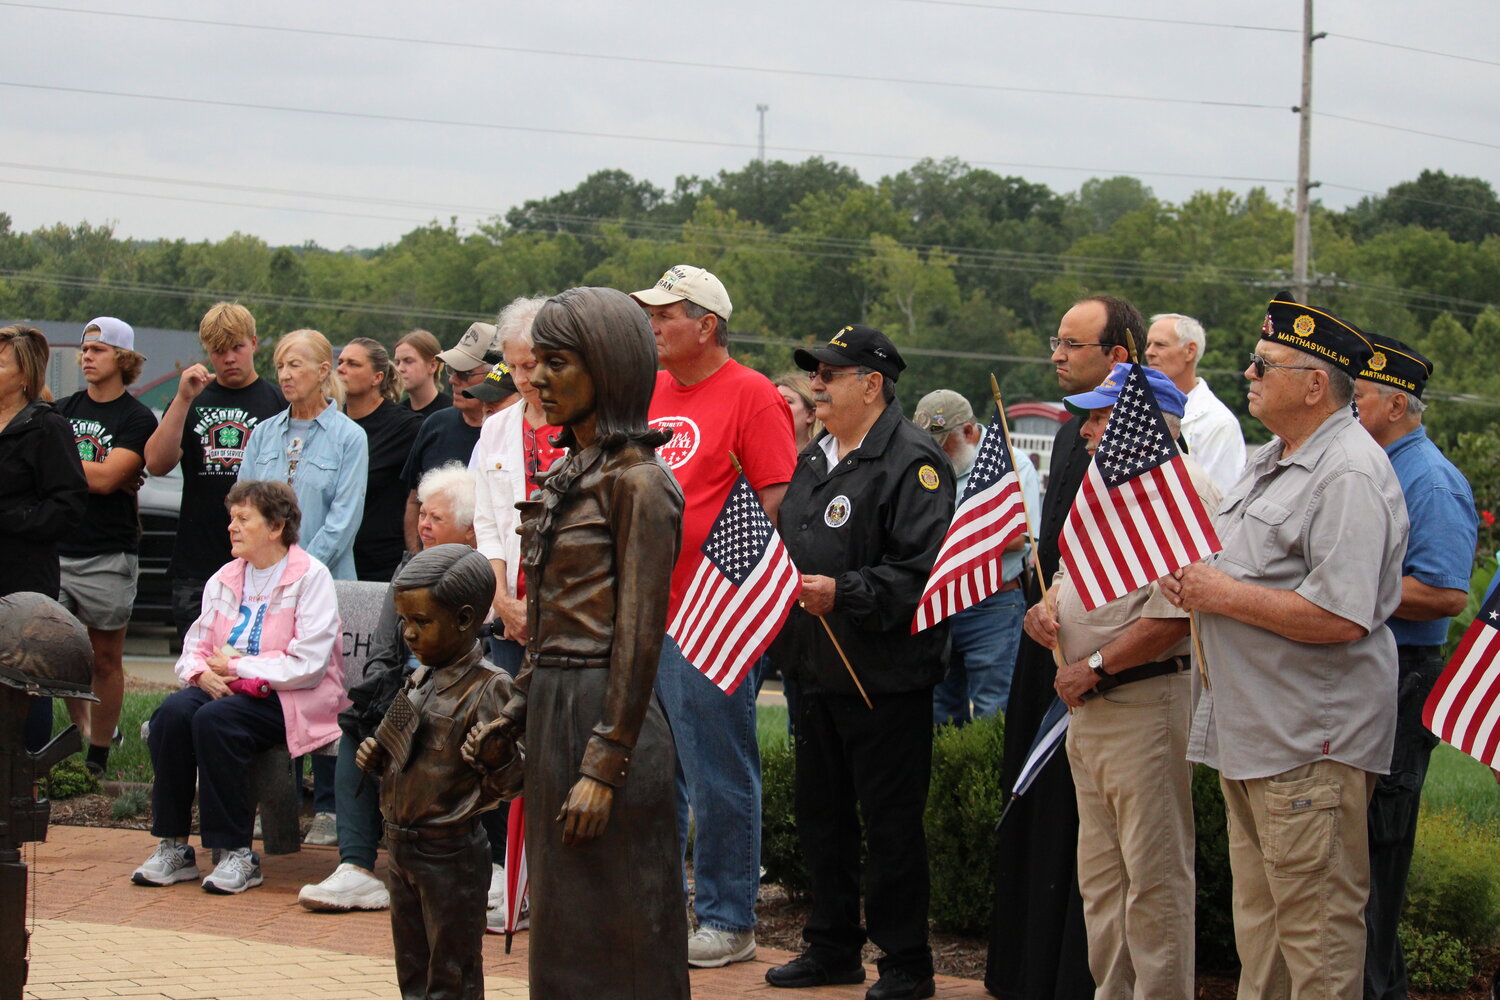 Members of the crowd listen during the Sept. 11 ceremony.